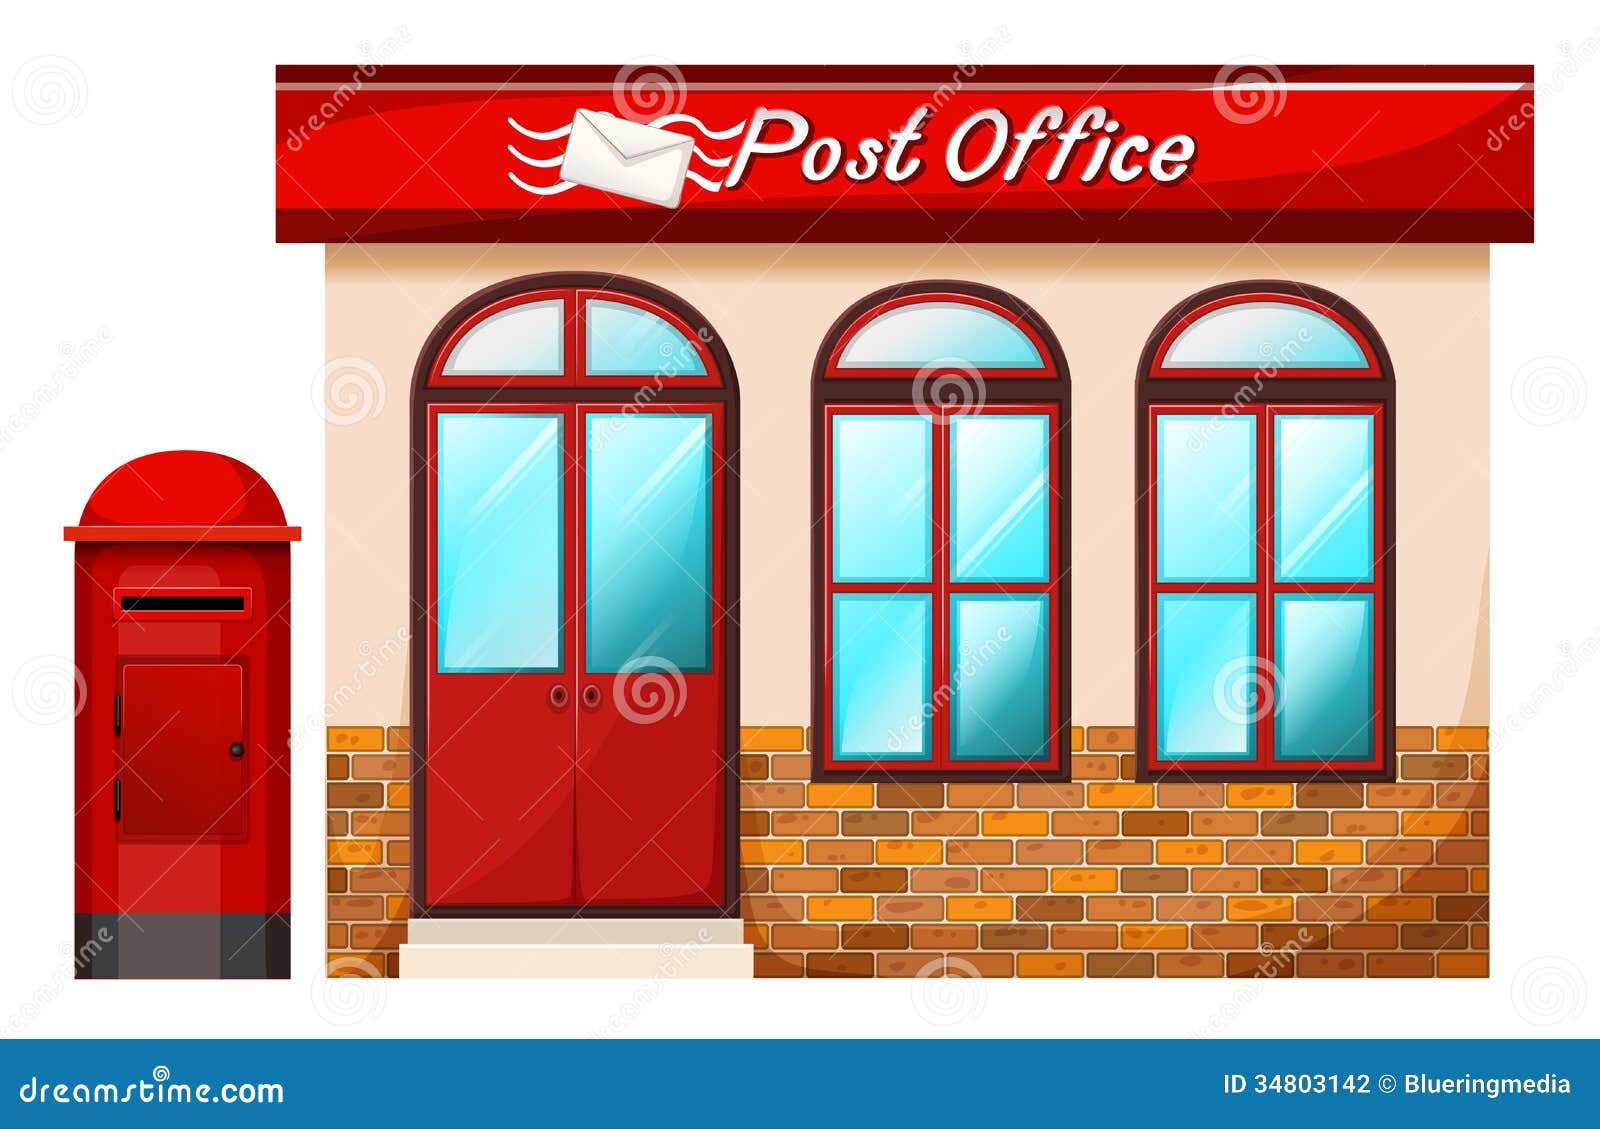 clipart post office building - photo #6